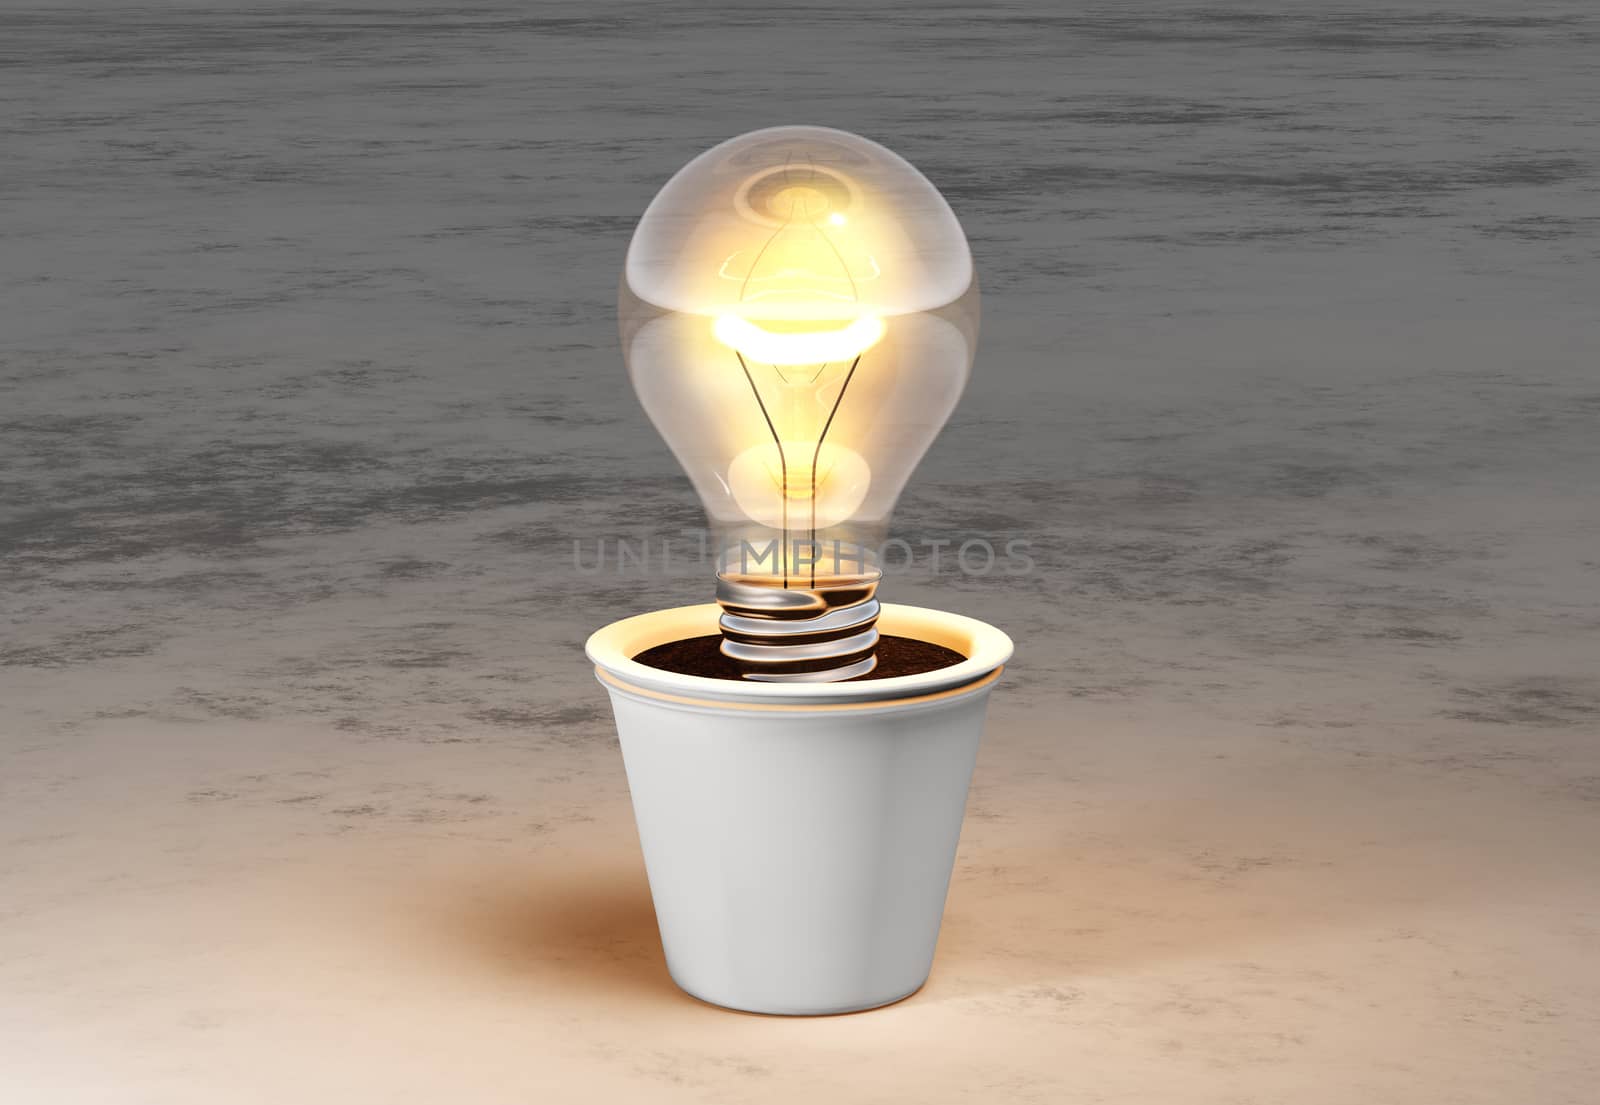 Light bulb in a vase by TaiChesco